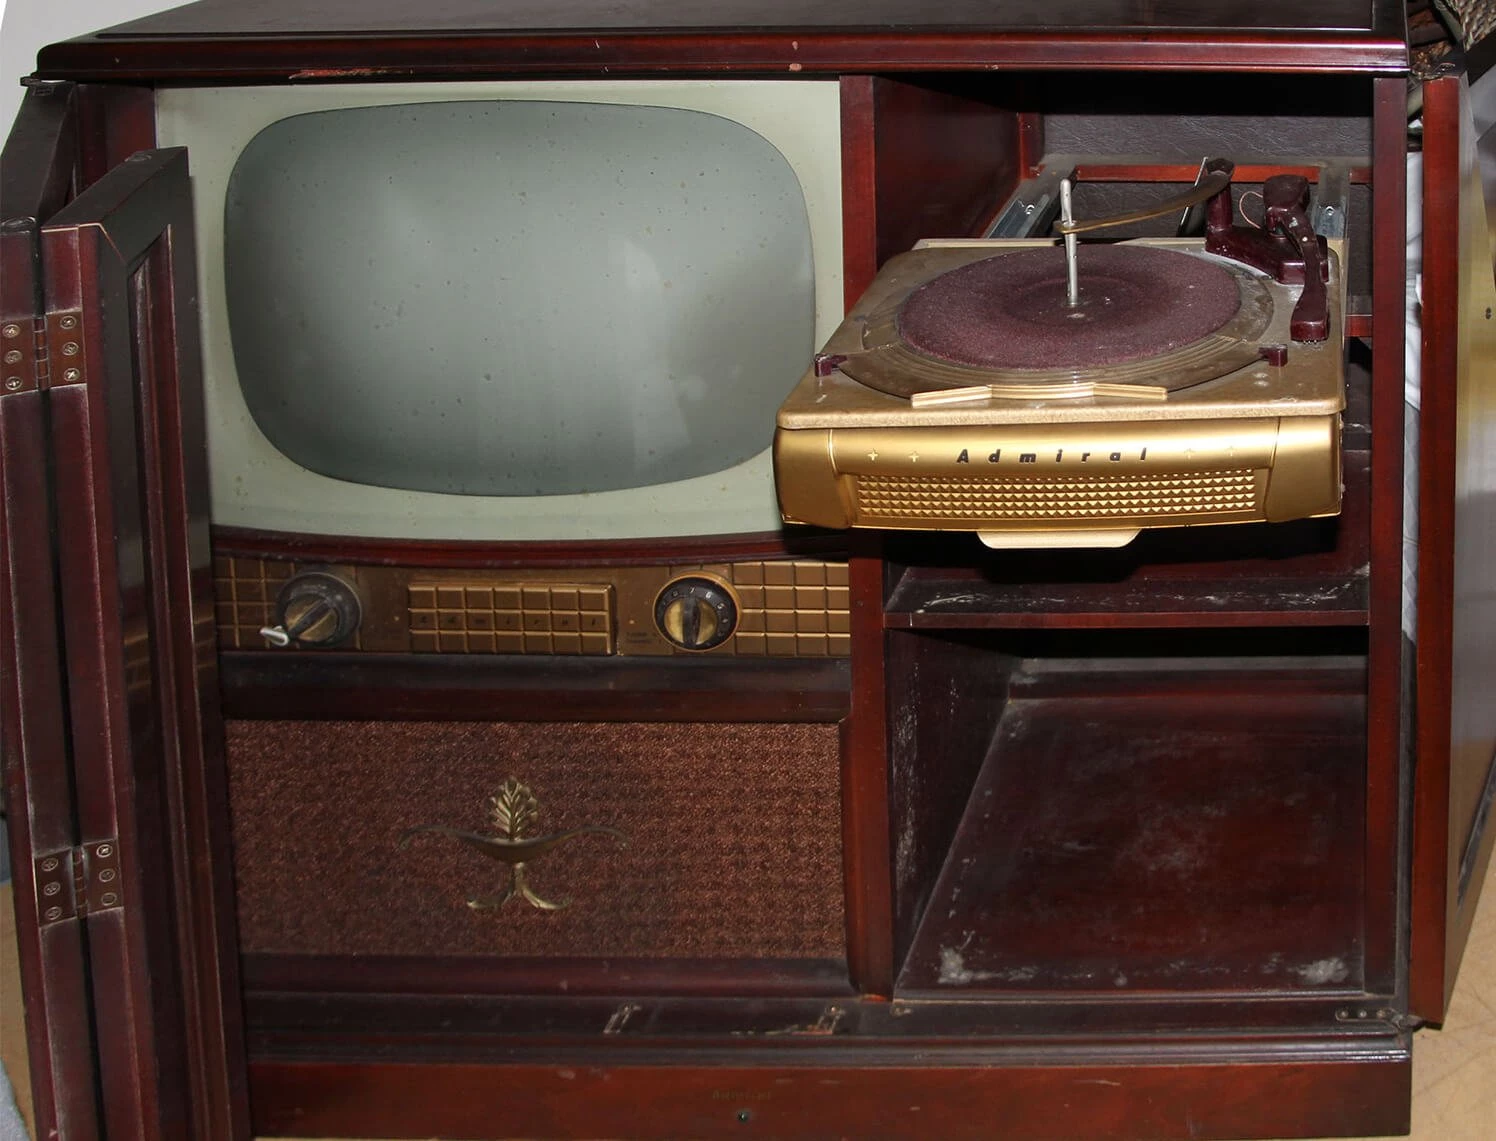 Photo of a console television with its door open.  There is dust on the shelf.